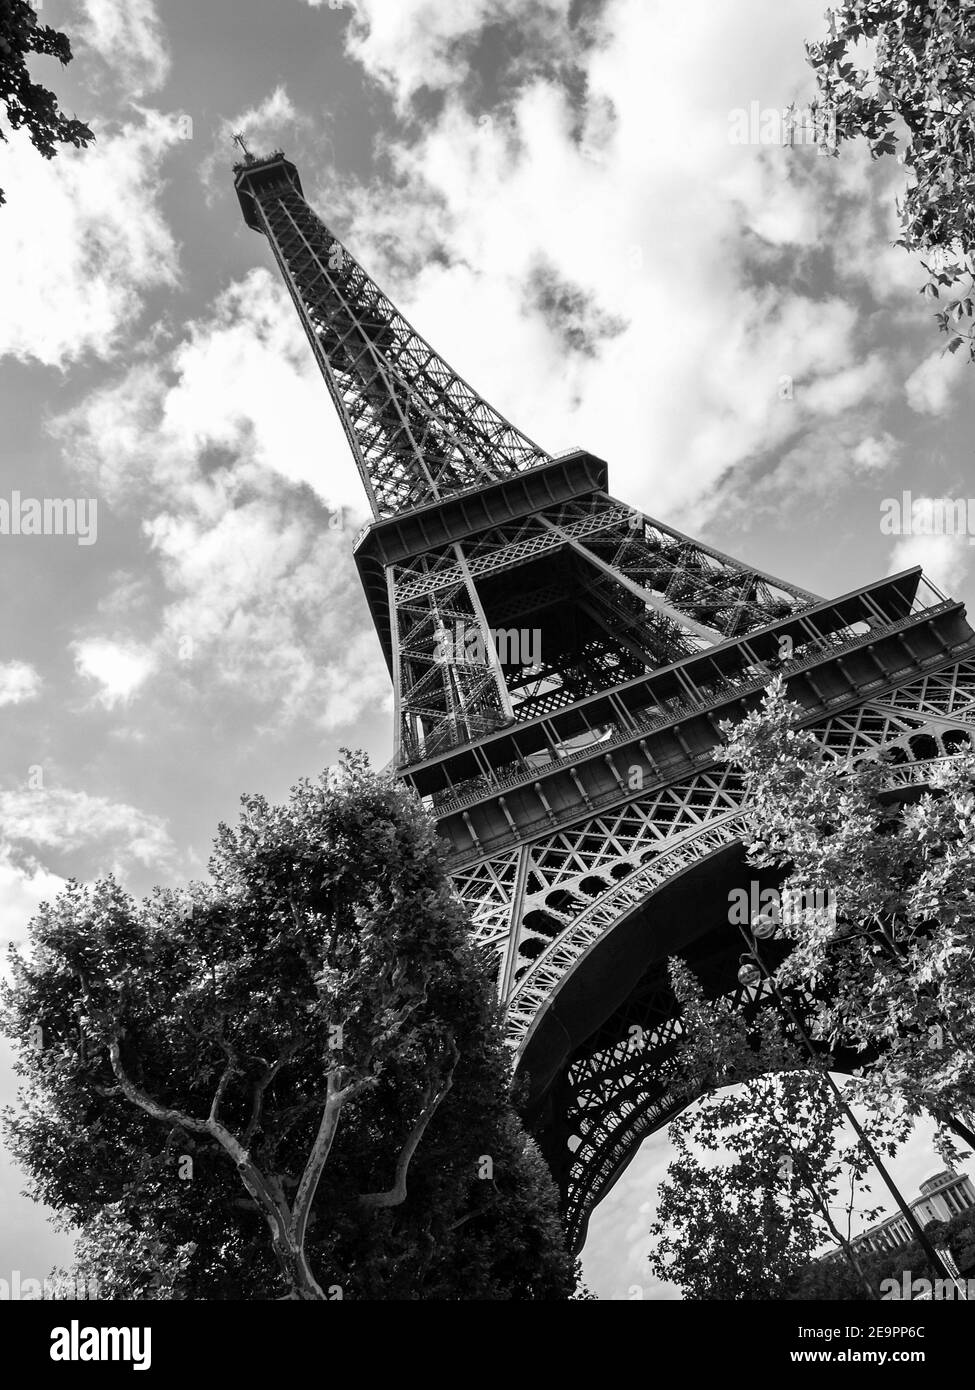 Bottom view of Eiffel Tower on sunny summer day, Paris, France. Black and white image. Stock Photo